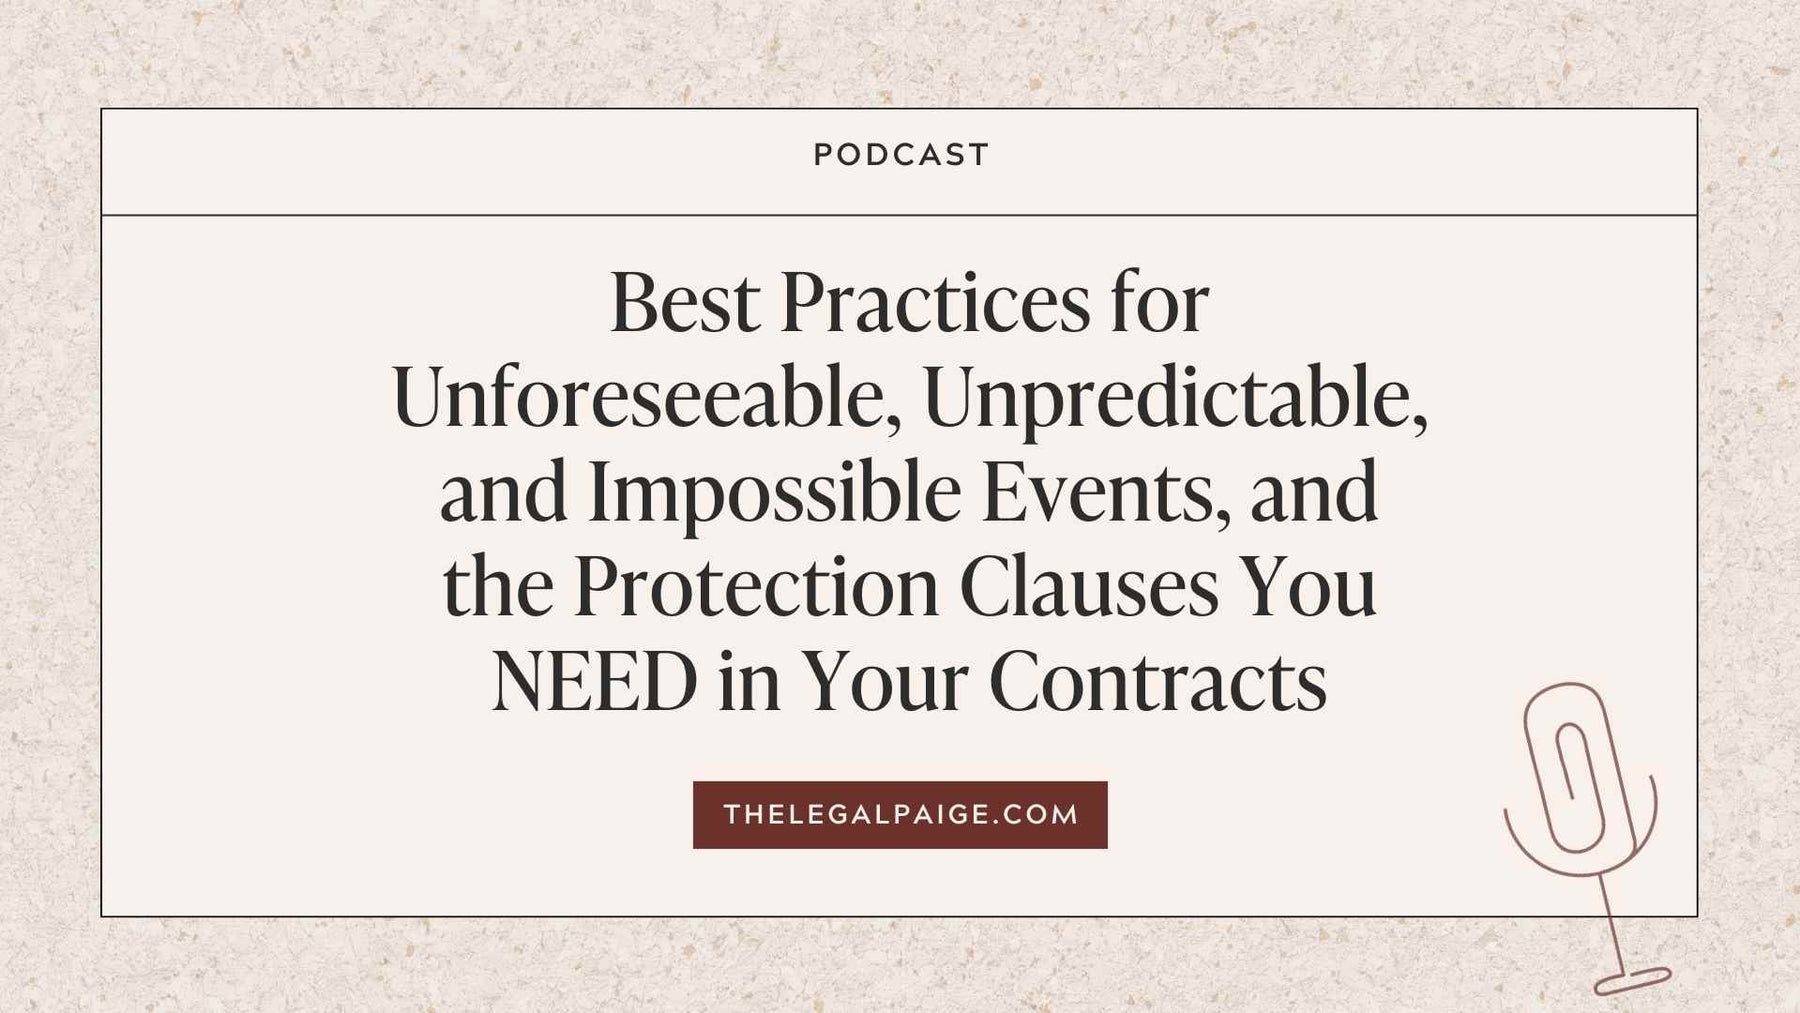 Episode 49: Best Practices for Unforeseeable, Unpredictable, and Impossible Events, and the Protection Clauses You NEED in Your Contracts